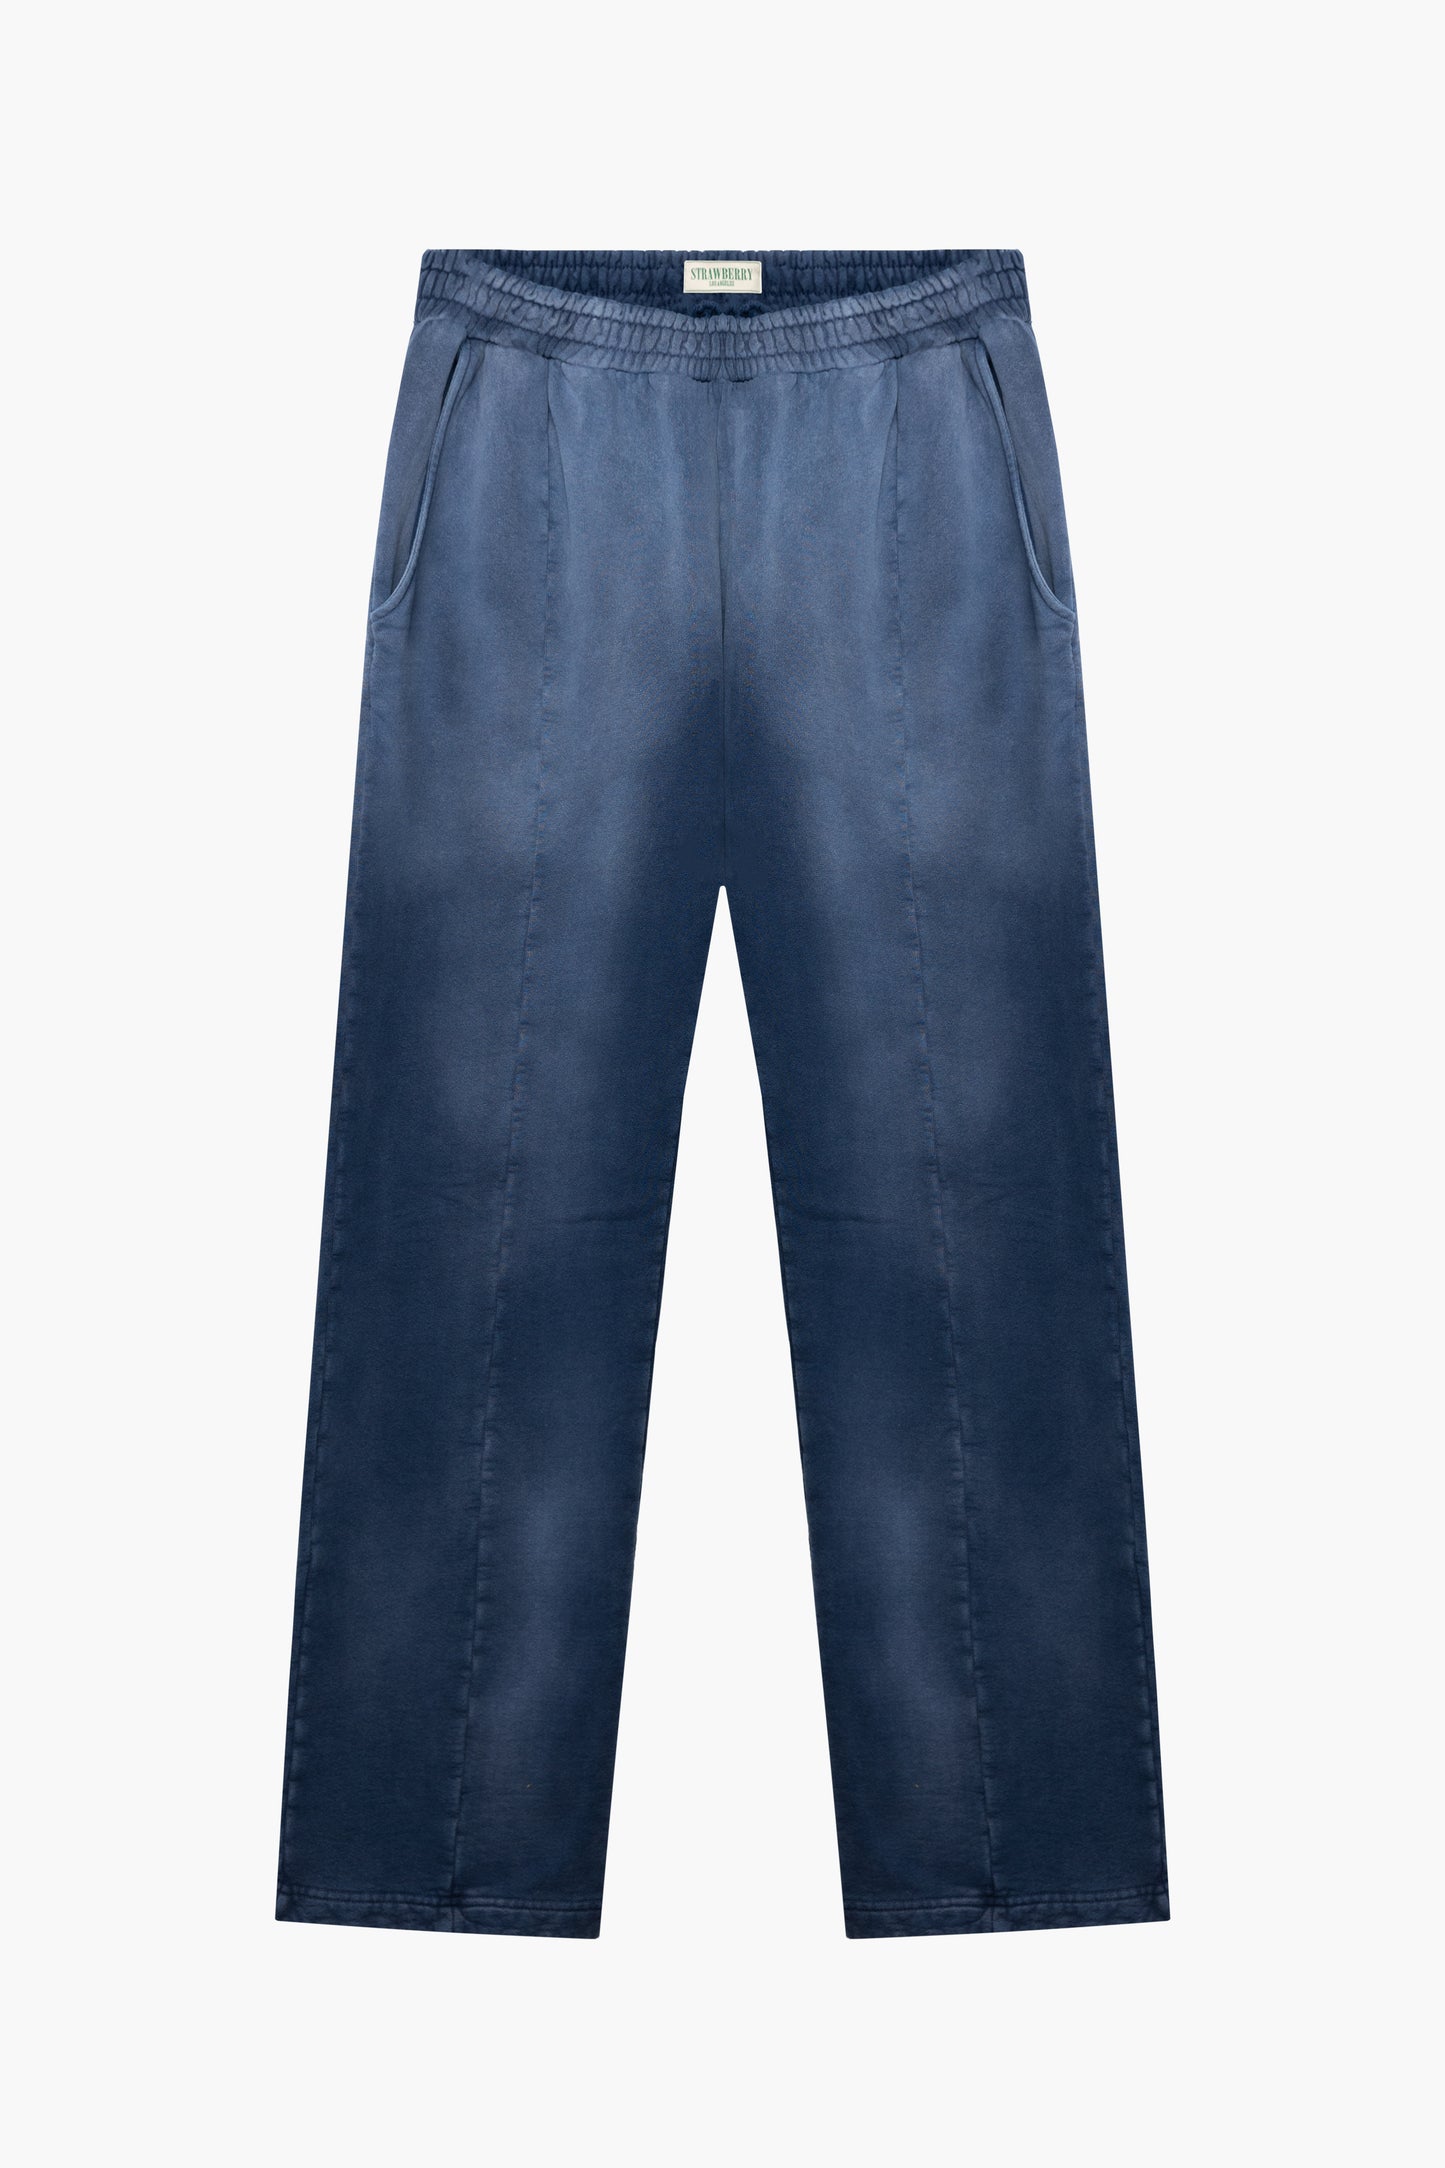 Navy Sunfaded Pleated Sweatpant